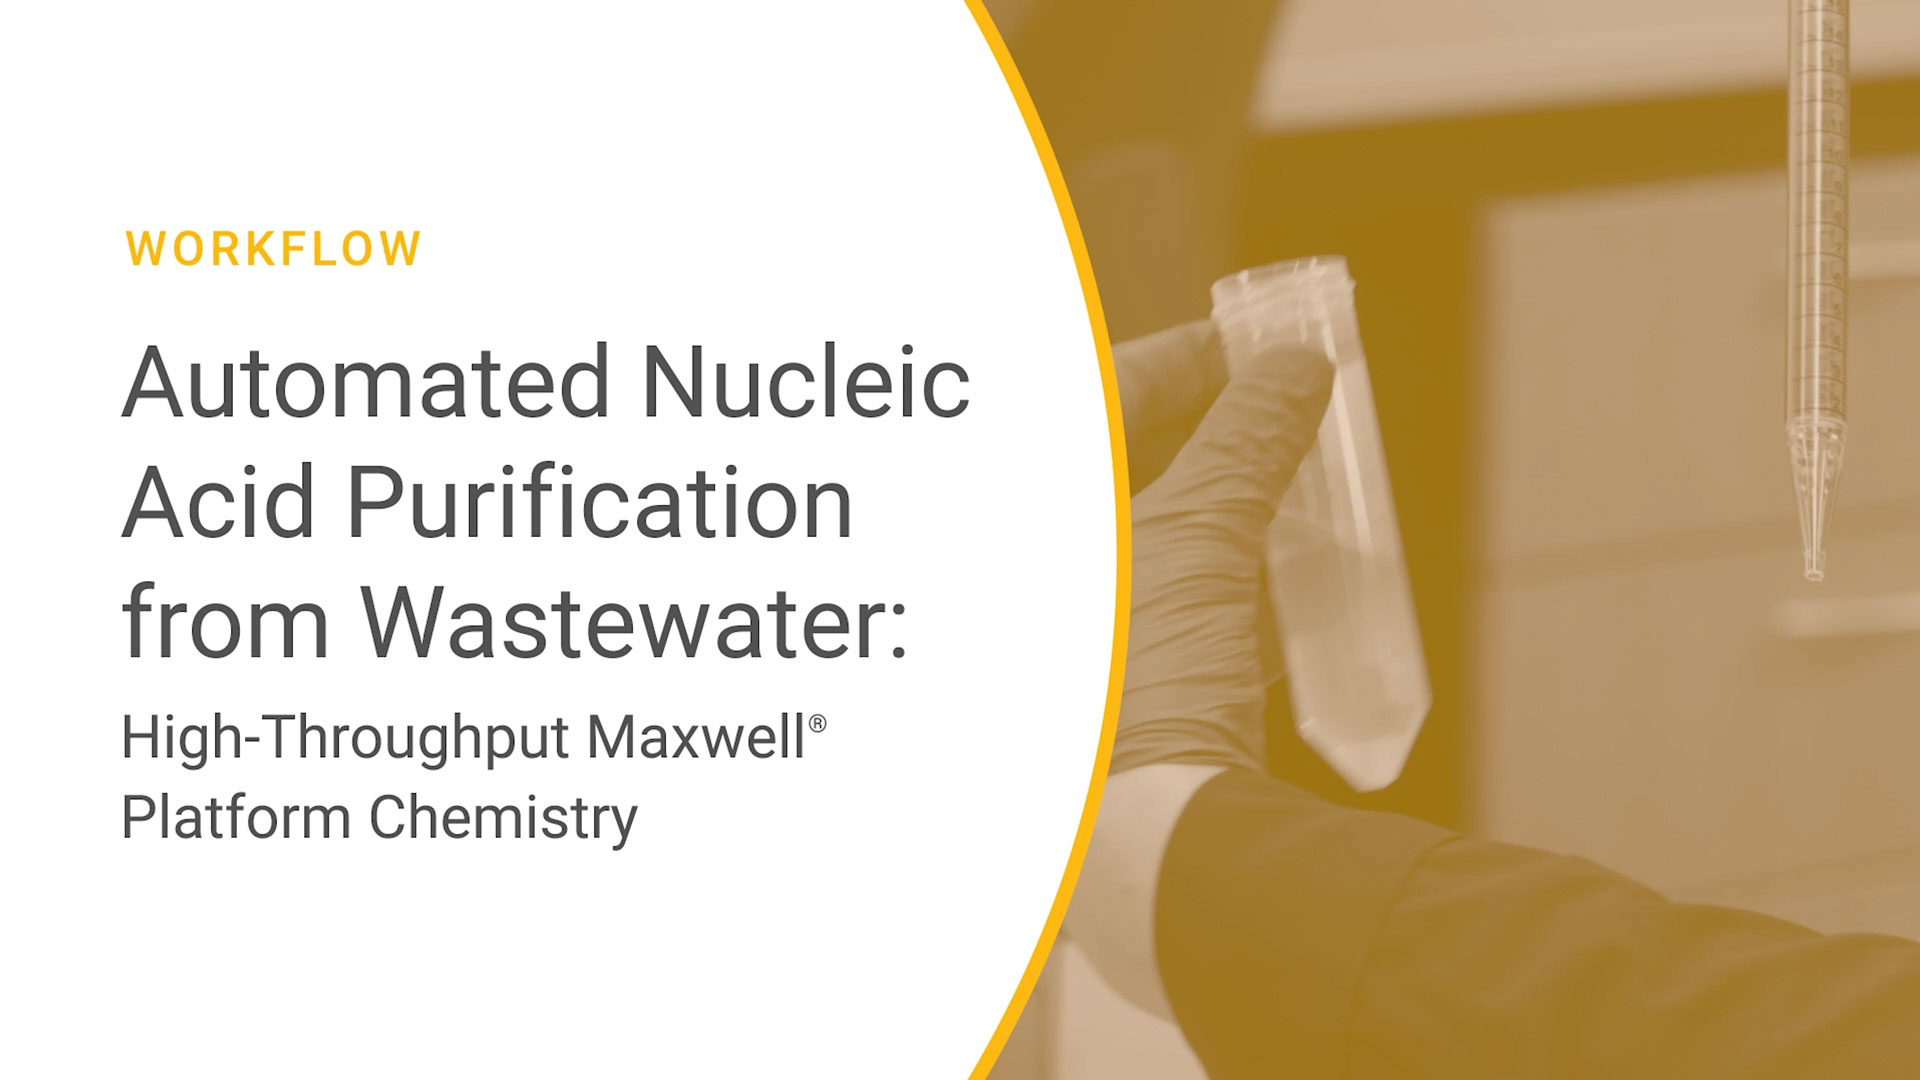 Wastewater Testing Labs Can Automate Sample Processing for High Throughput With All-In-One Kit